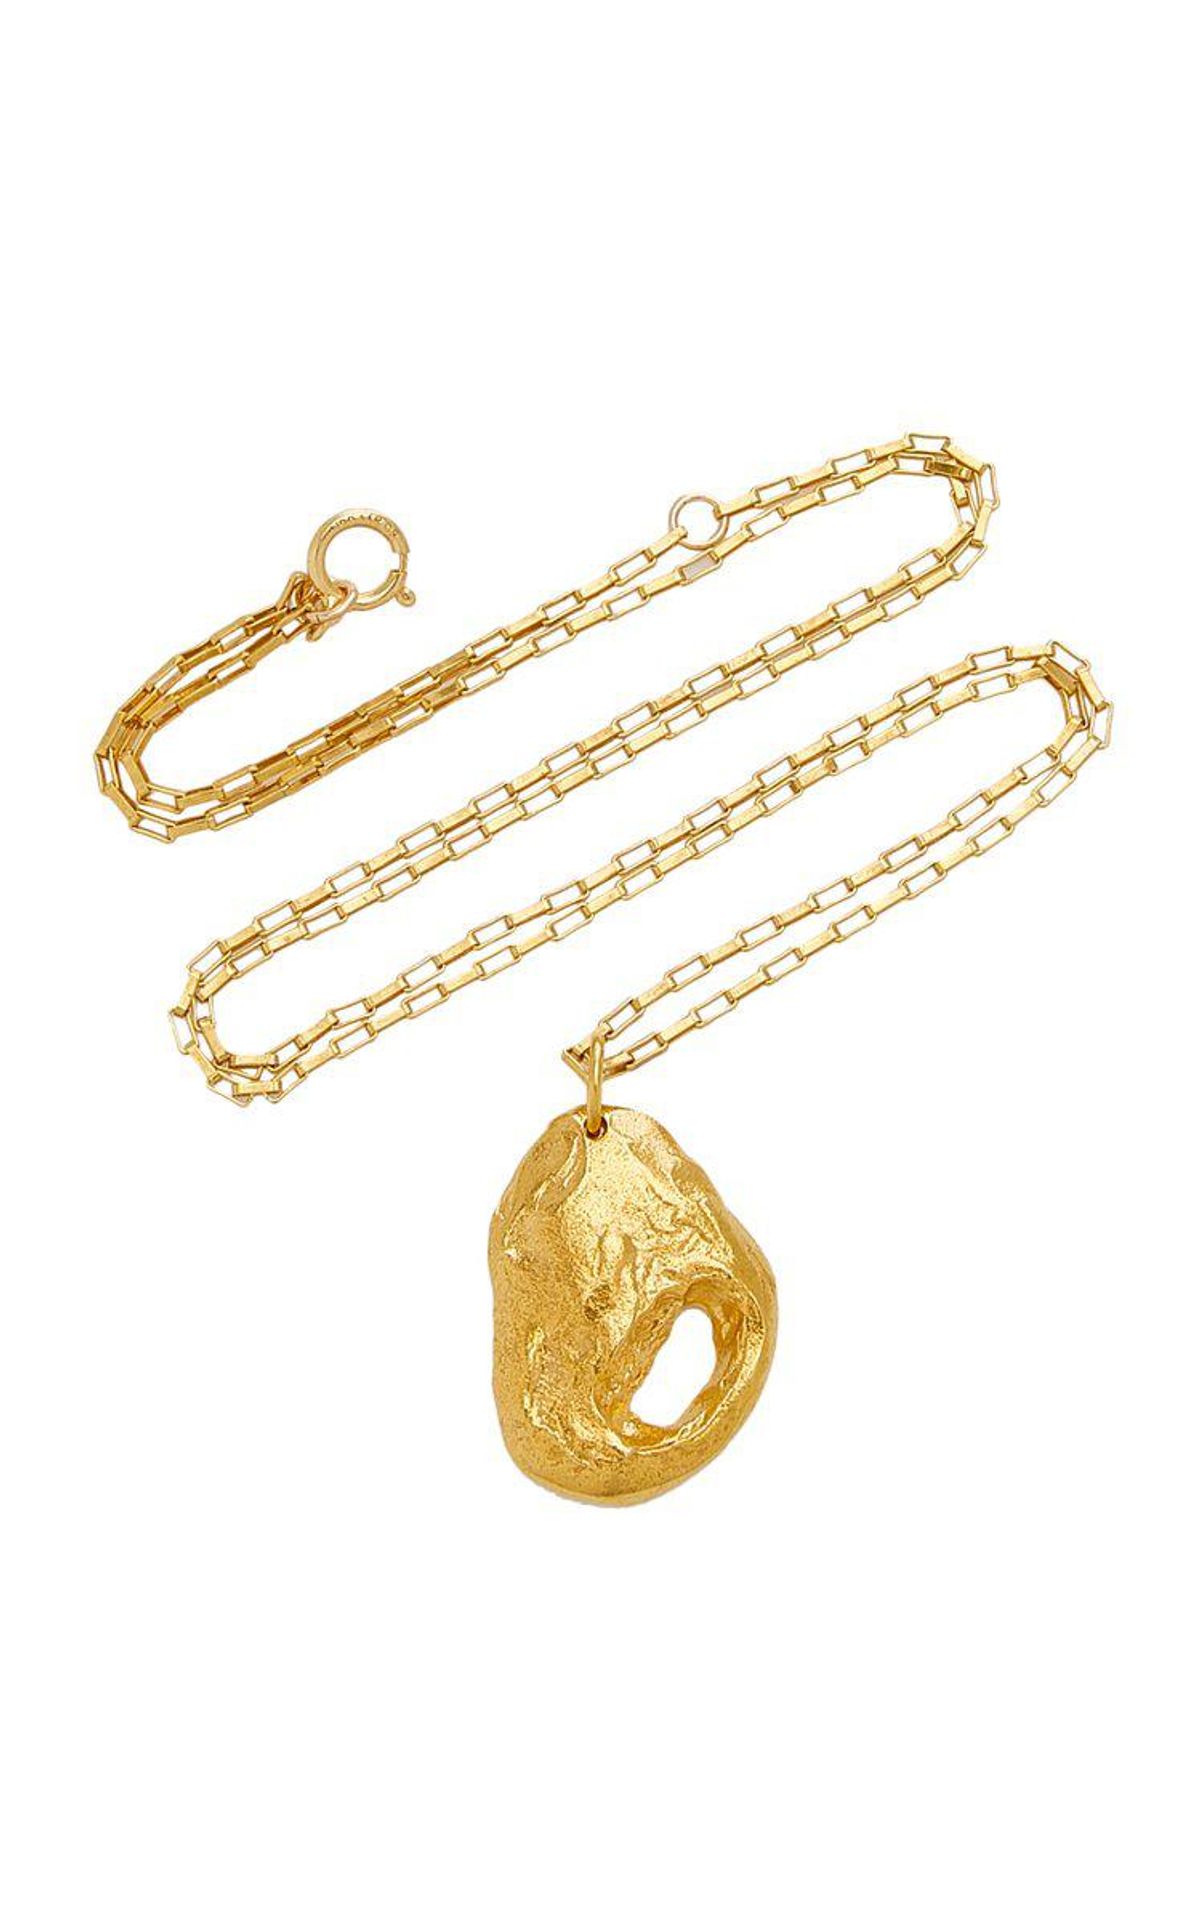 The Clouds in Your Mind 24k Gold Plated Necklace